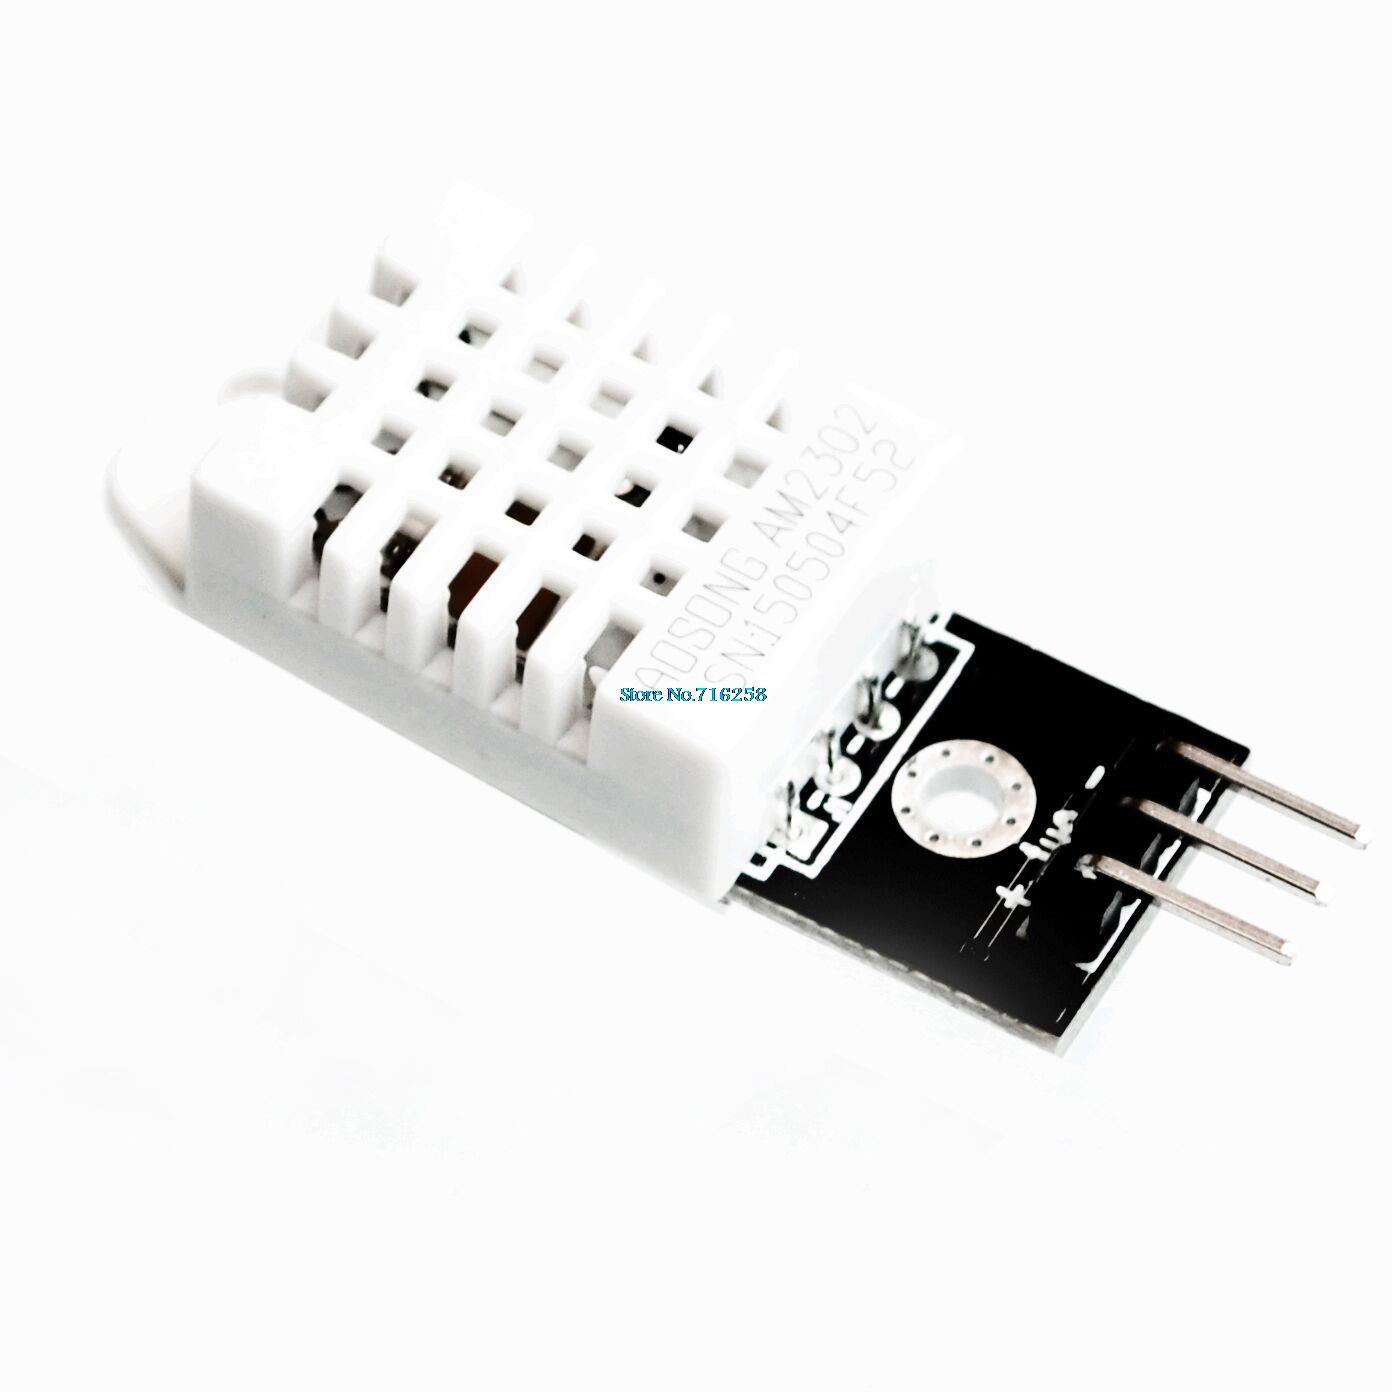 10sets-DHT22-Digital-Temperature-and-Humidity-Sensor-AM2302-Module-PCB-with-Cable-Dropshipping